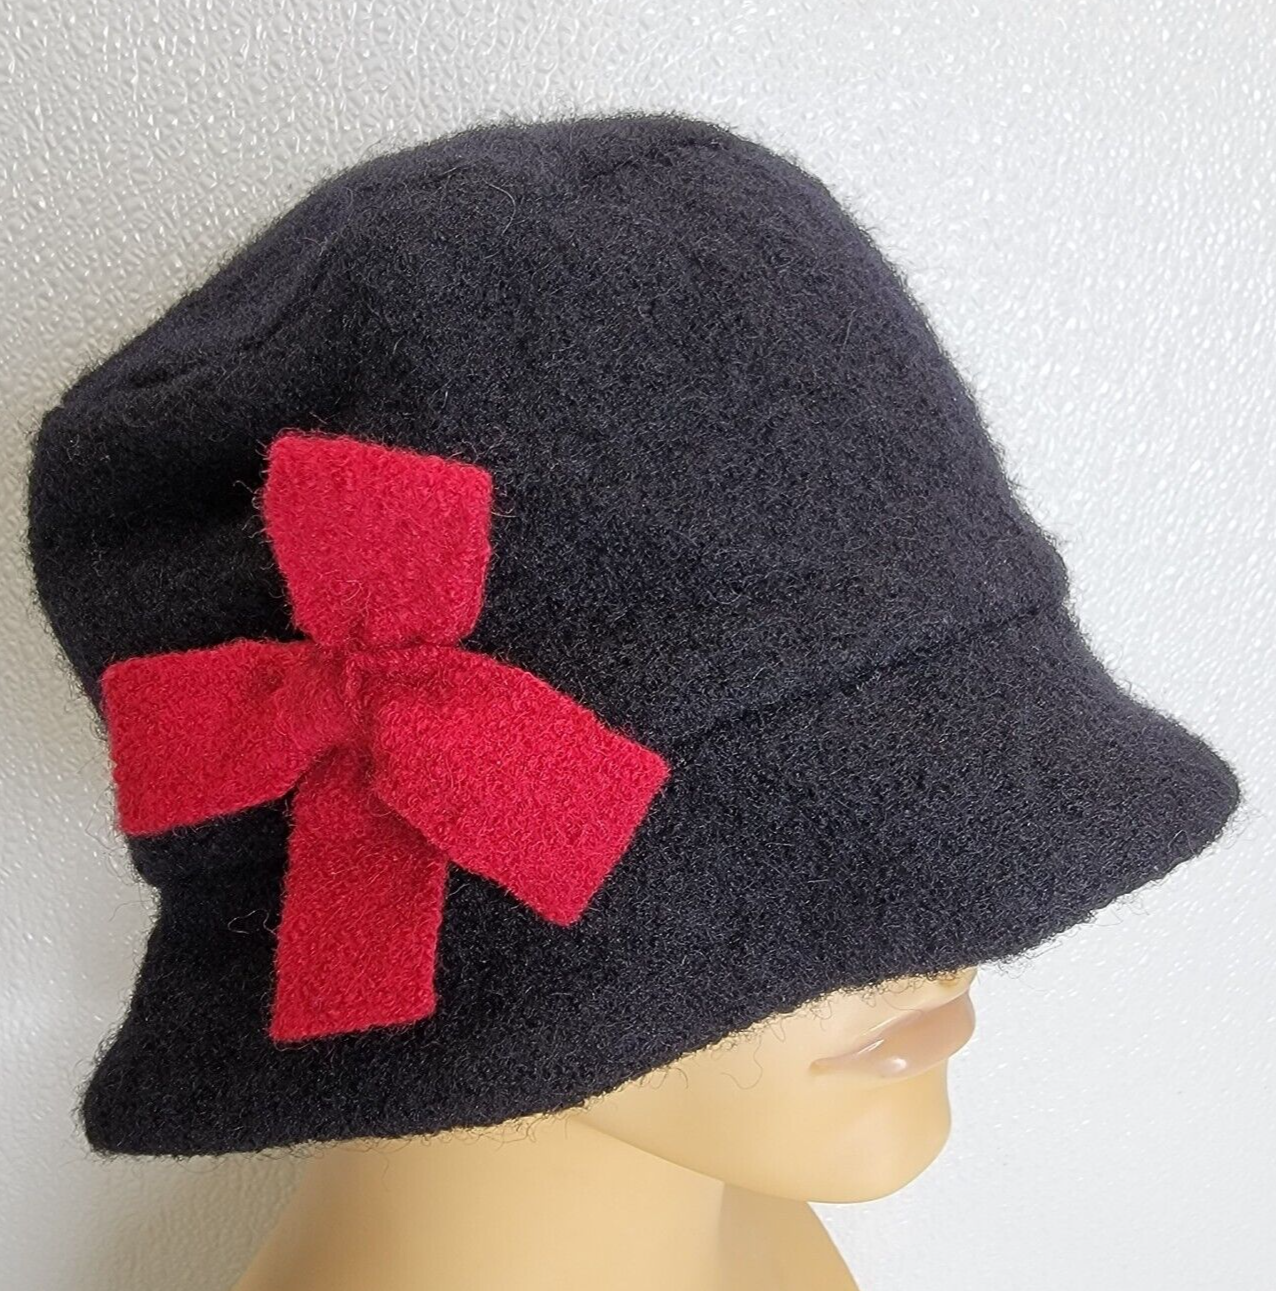 Primary image for The Tog Shop Wool Womens Black Bucket Hat Red Bow Winter Warm Cute